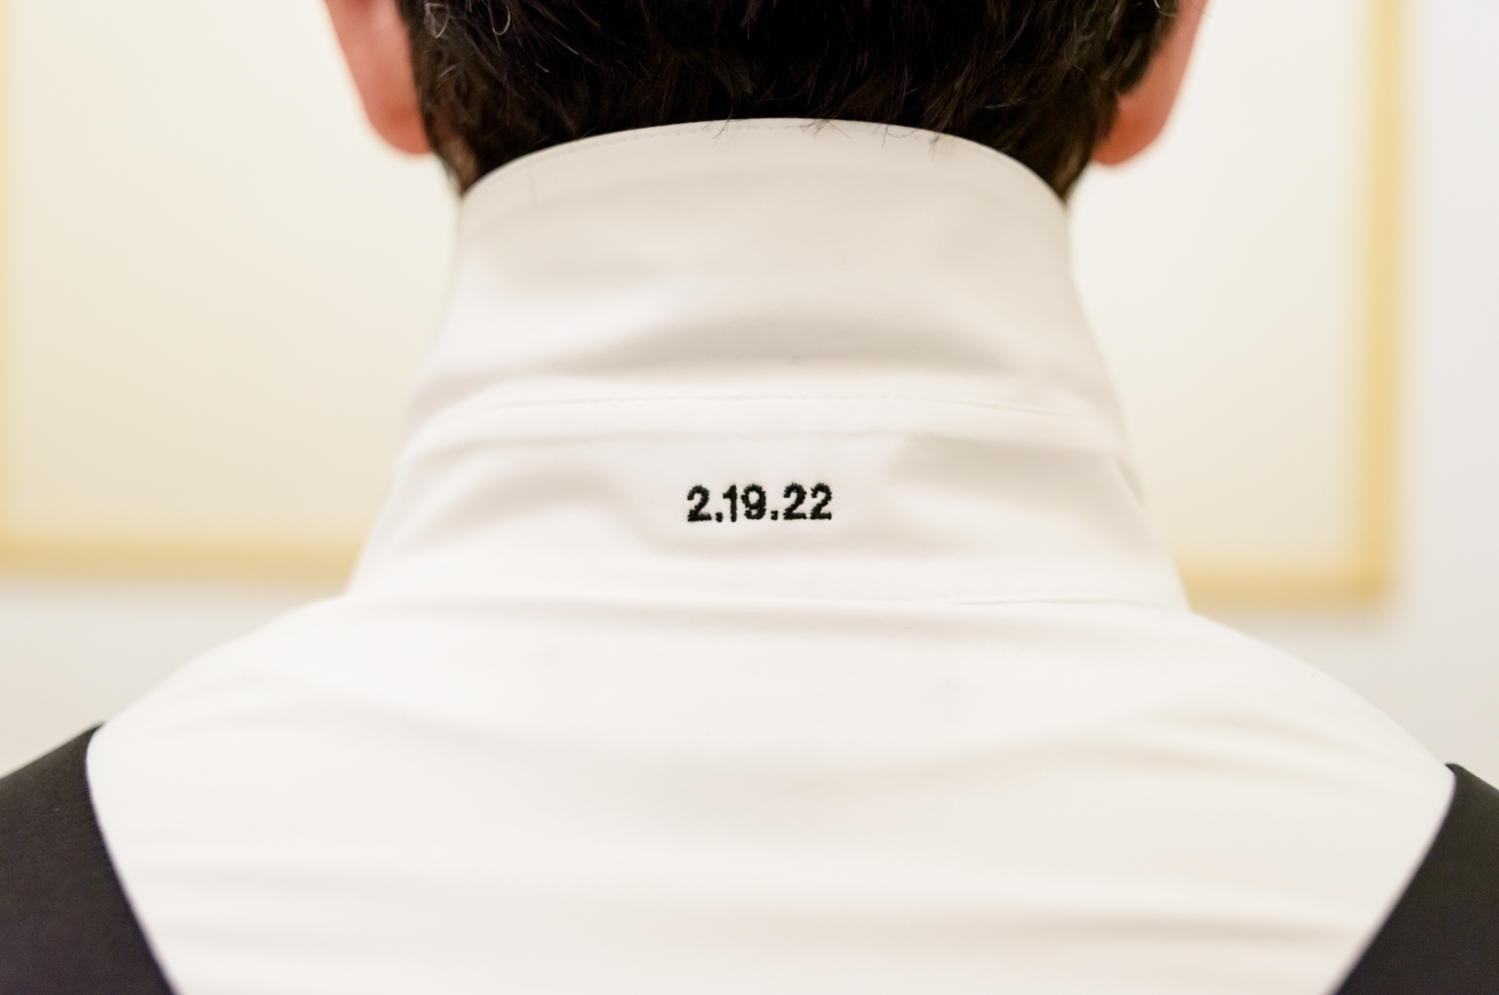 The groom's embroidered dress shirt with his wedding date underneath the collar.